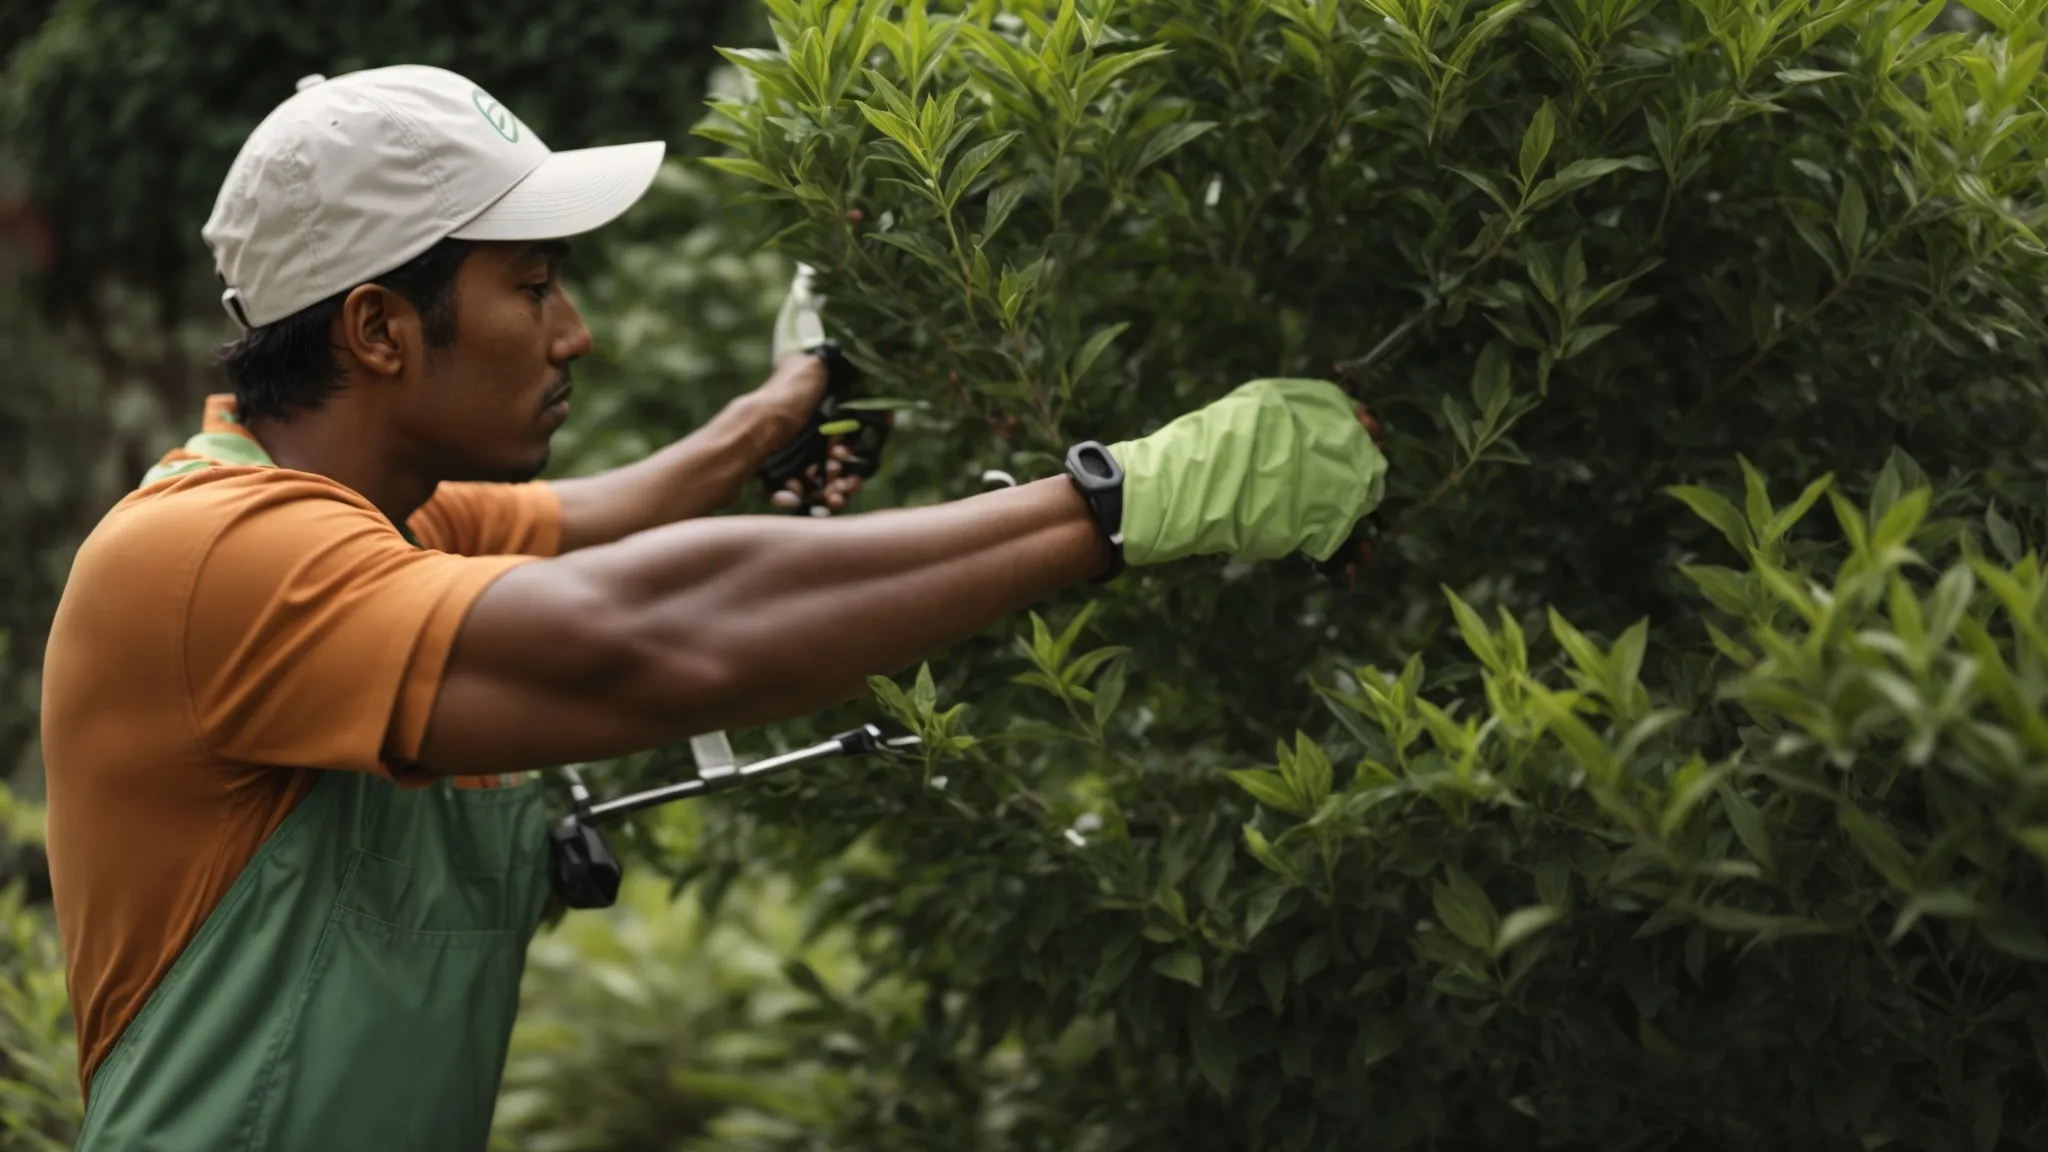 a gardener carefully pruning a bush to promote healthy growth, symbolizing the practice of refining and optimizing for better performance.